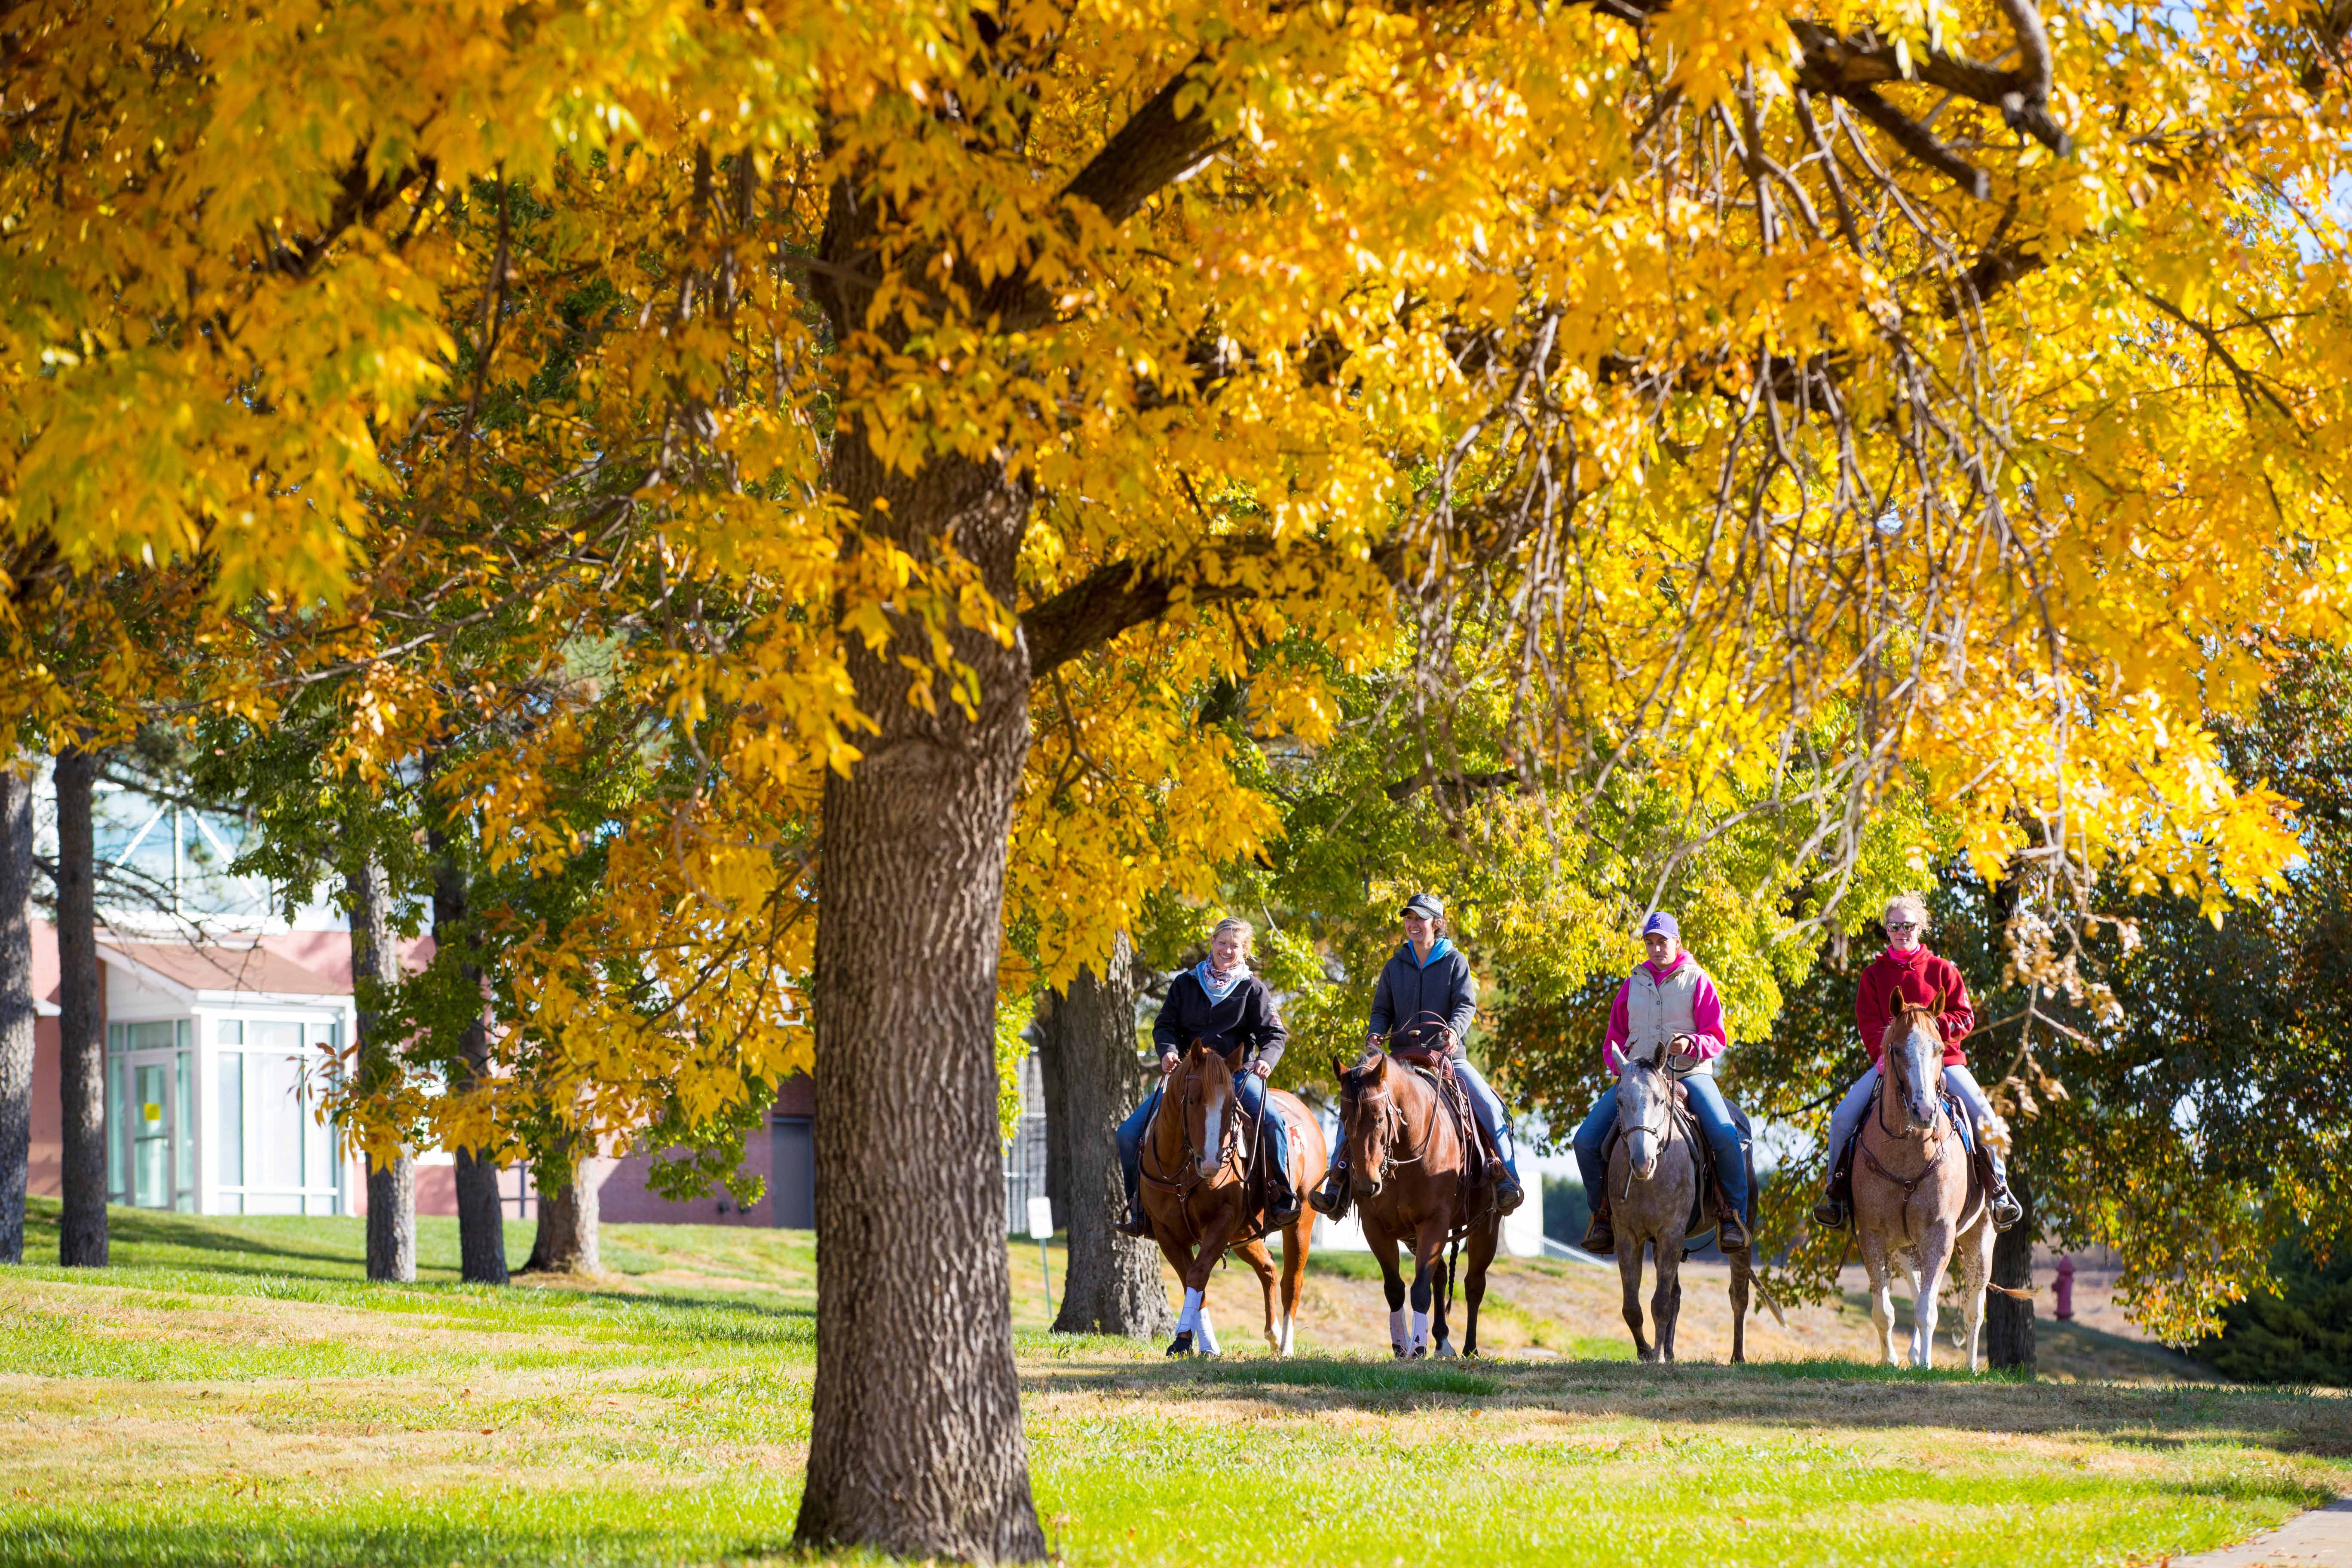 Autumn provides a scenic ride near the NCTA Vet Tech complex on campus. (Chandler/NCTA Photo)